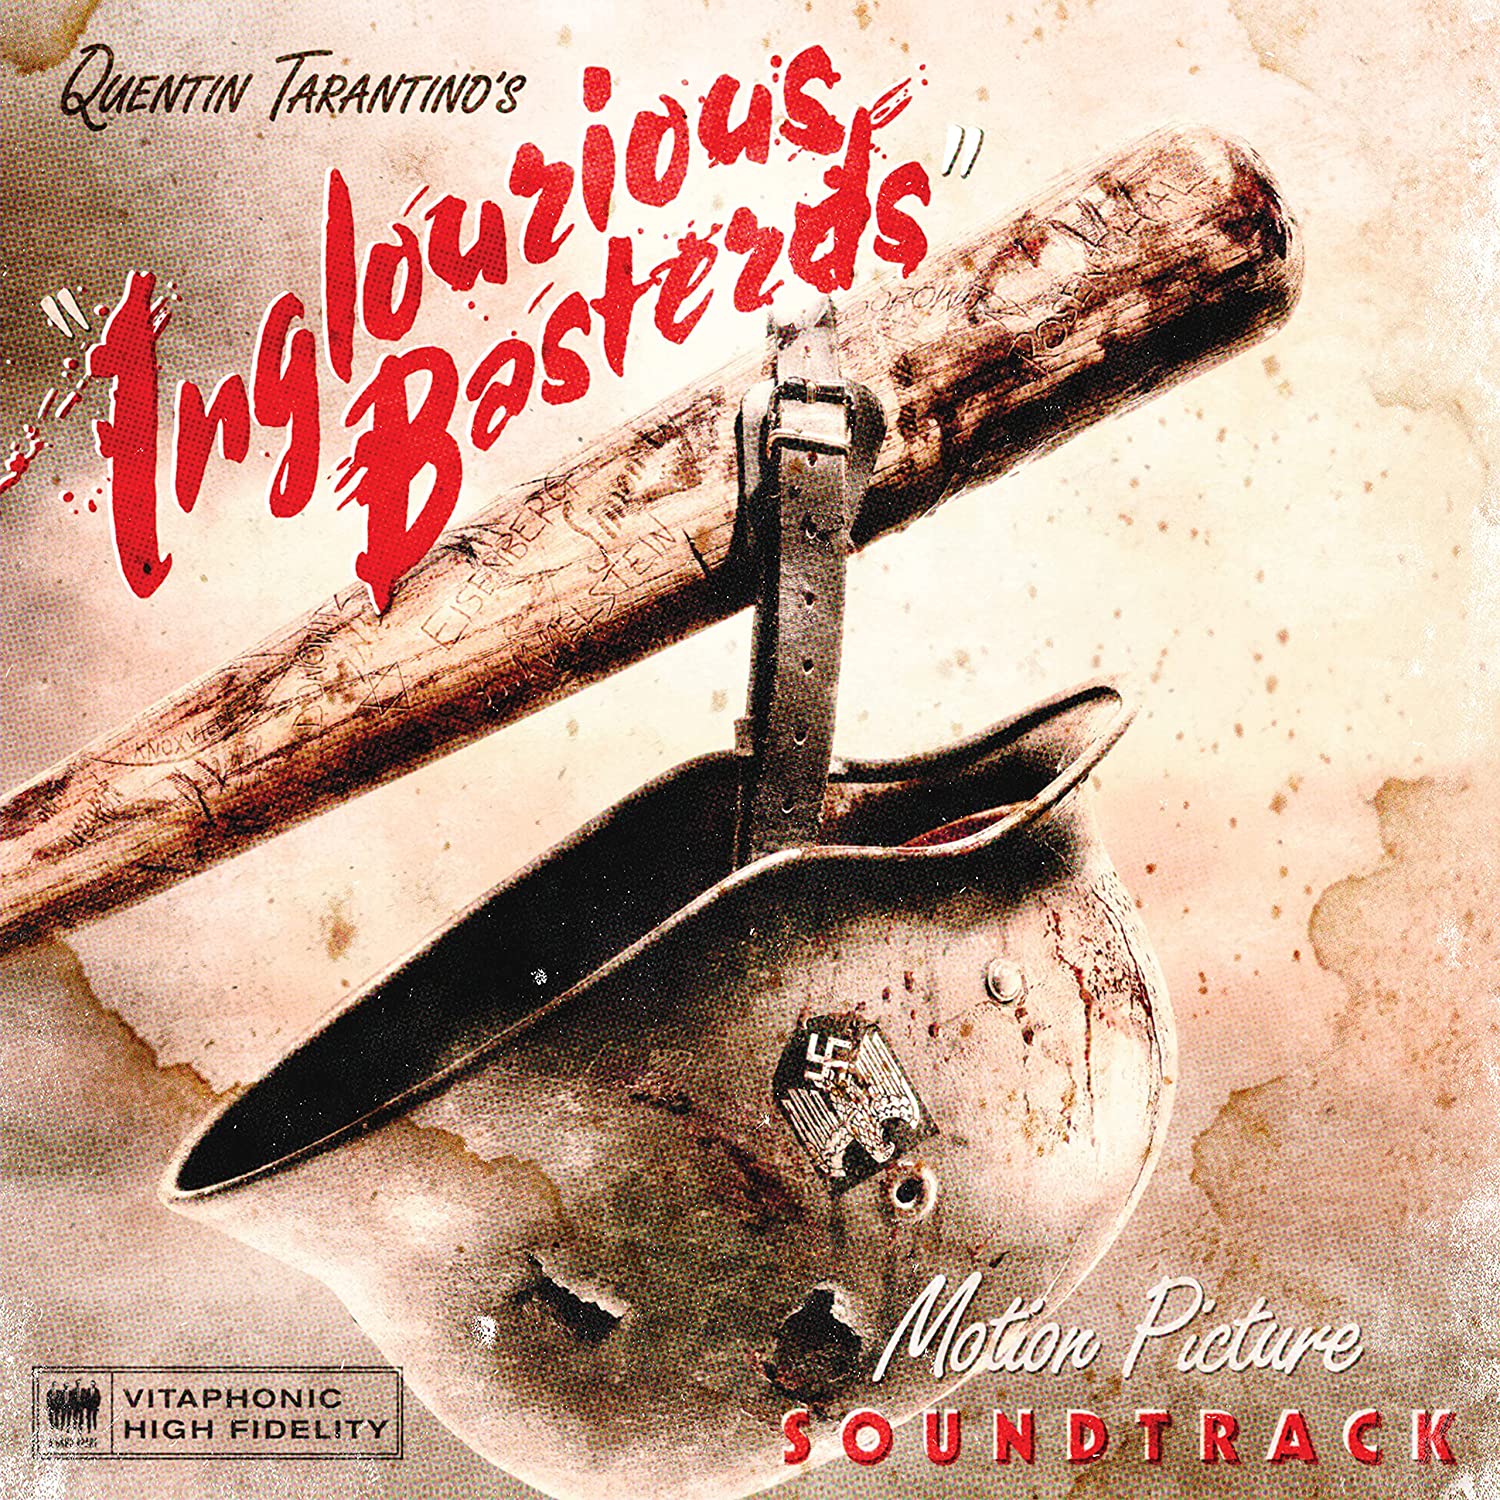 Ost / Soundtrack Quentin Tarantino's Inglourious Basterds / Red Vinyl